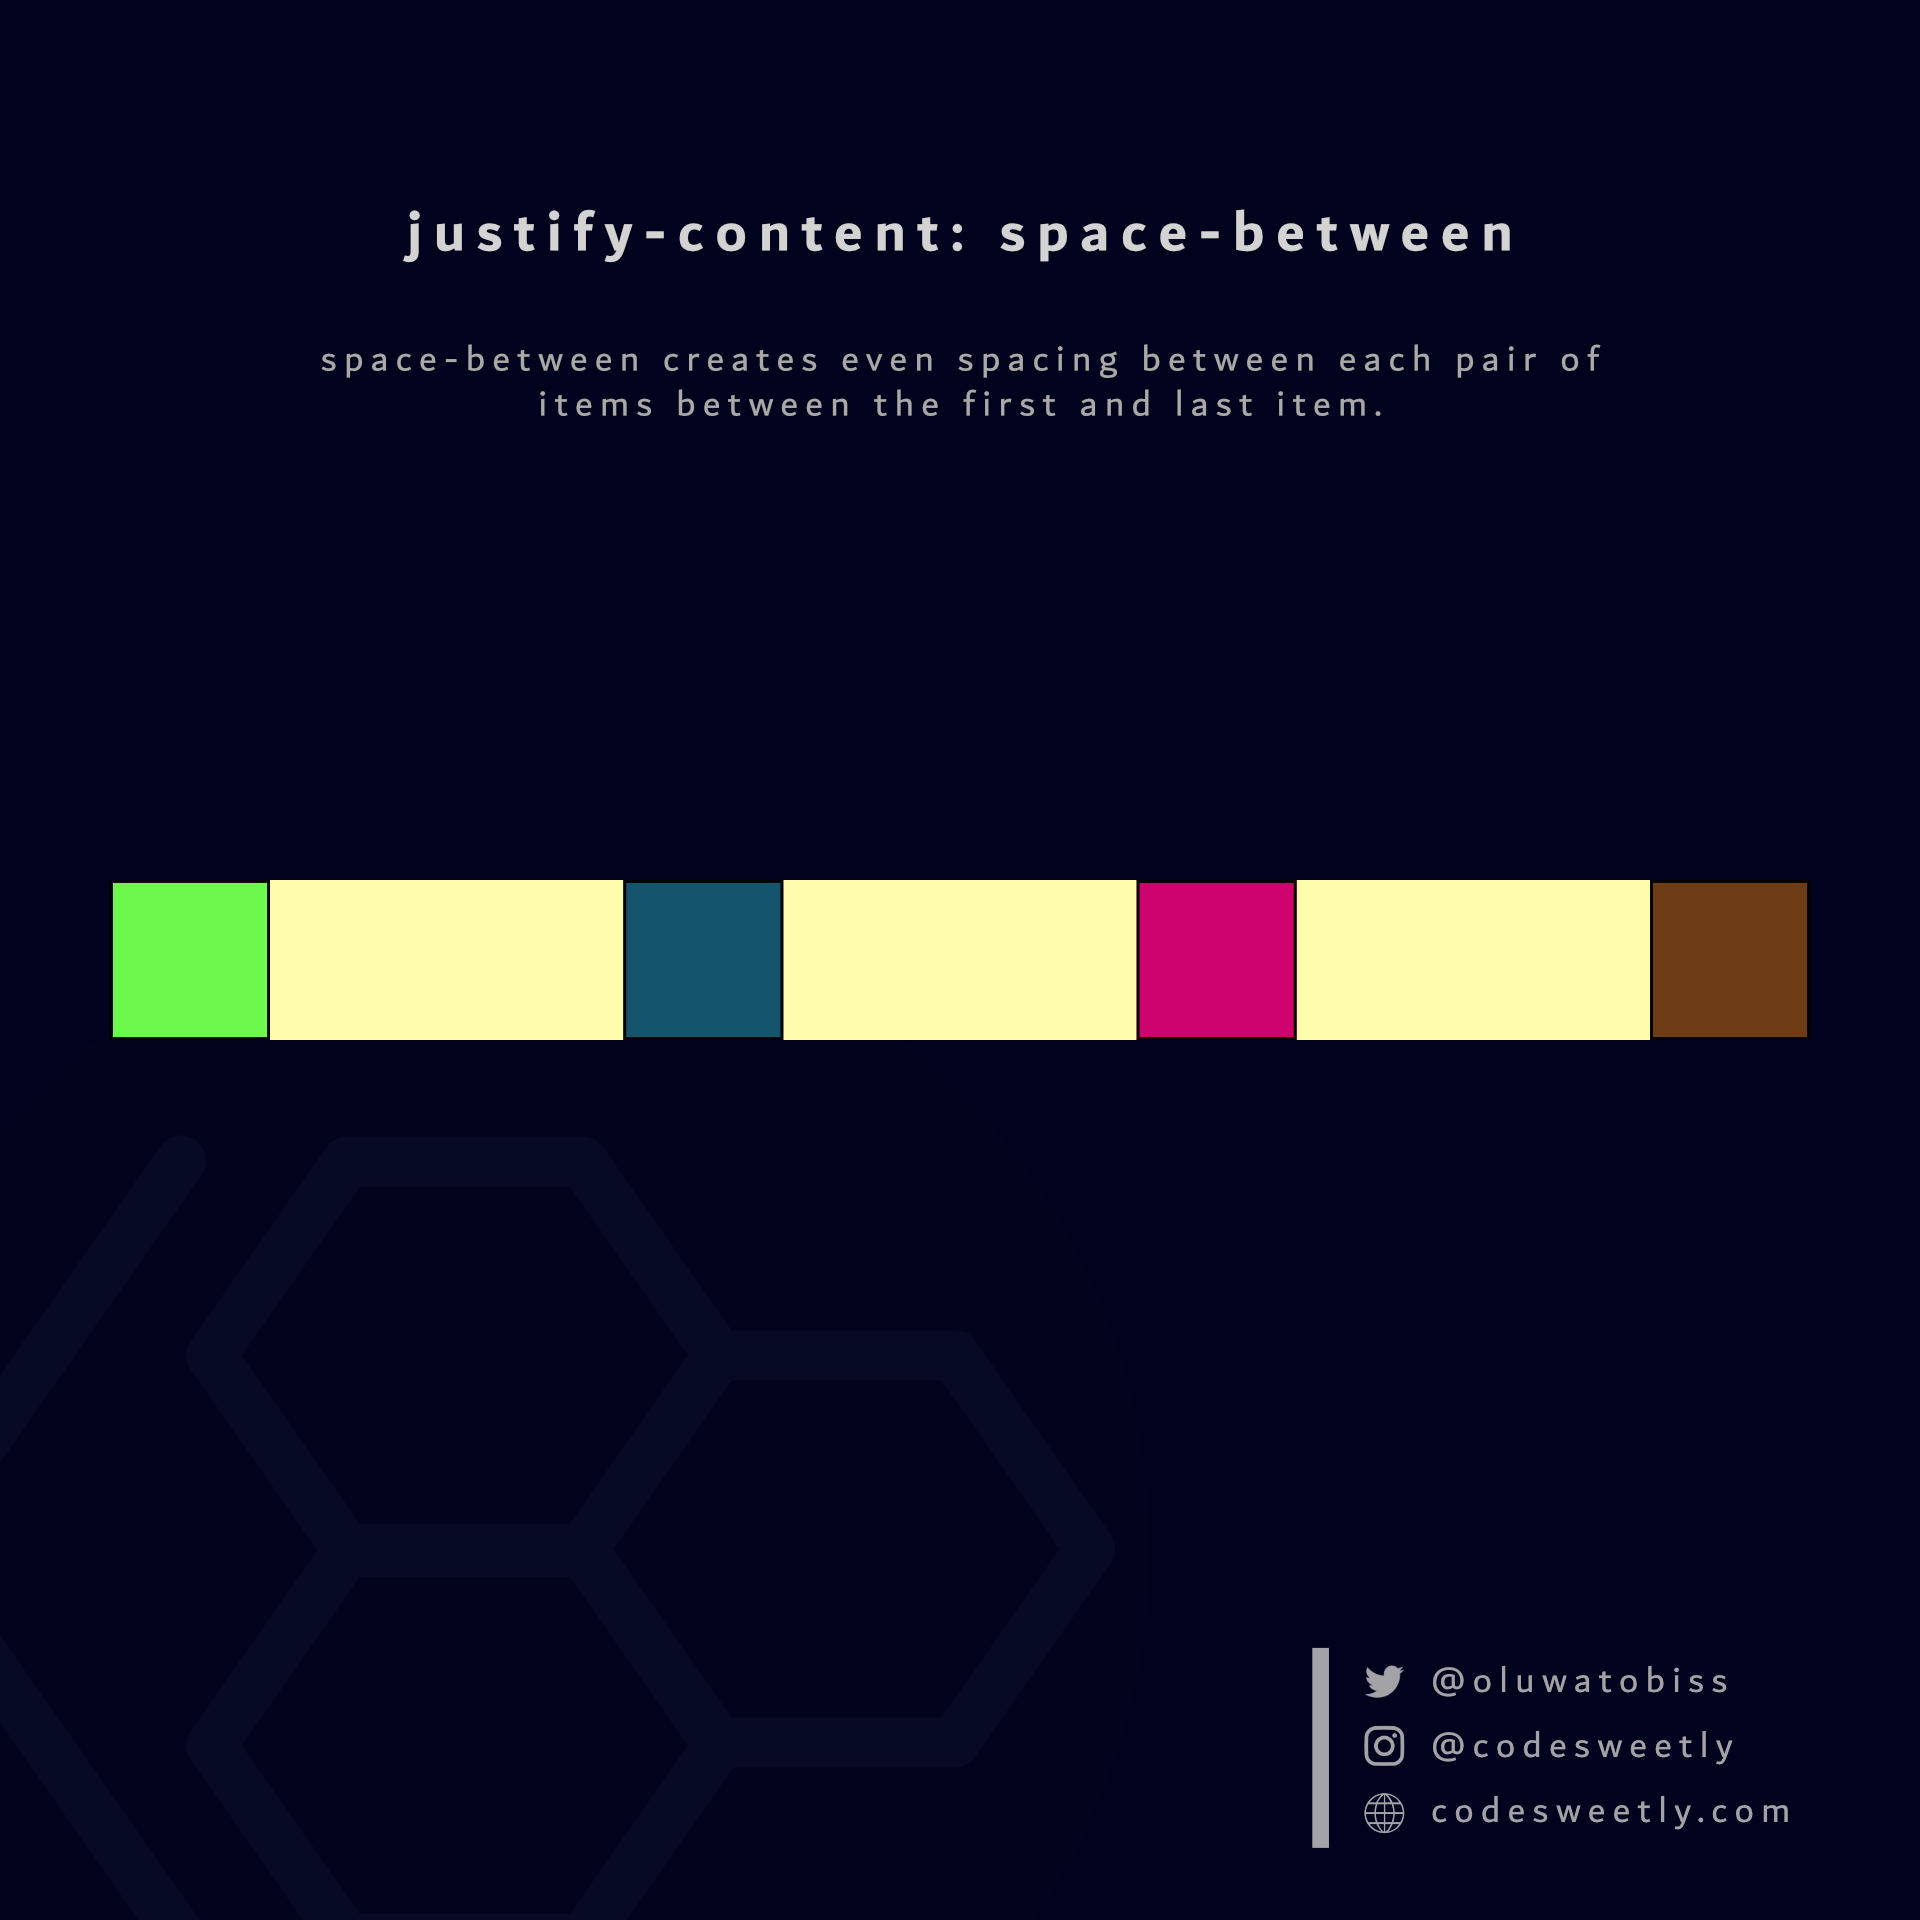 Illustration of justify-content's space-between value